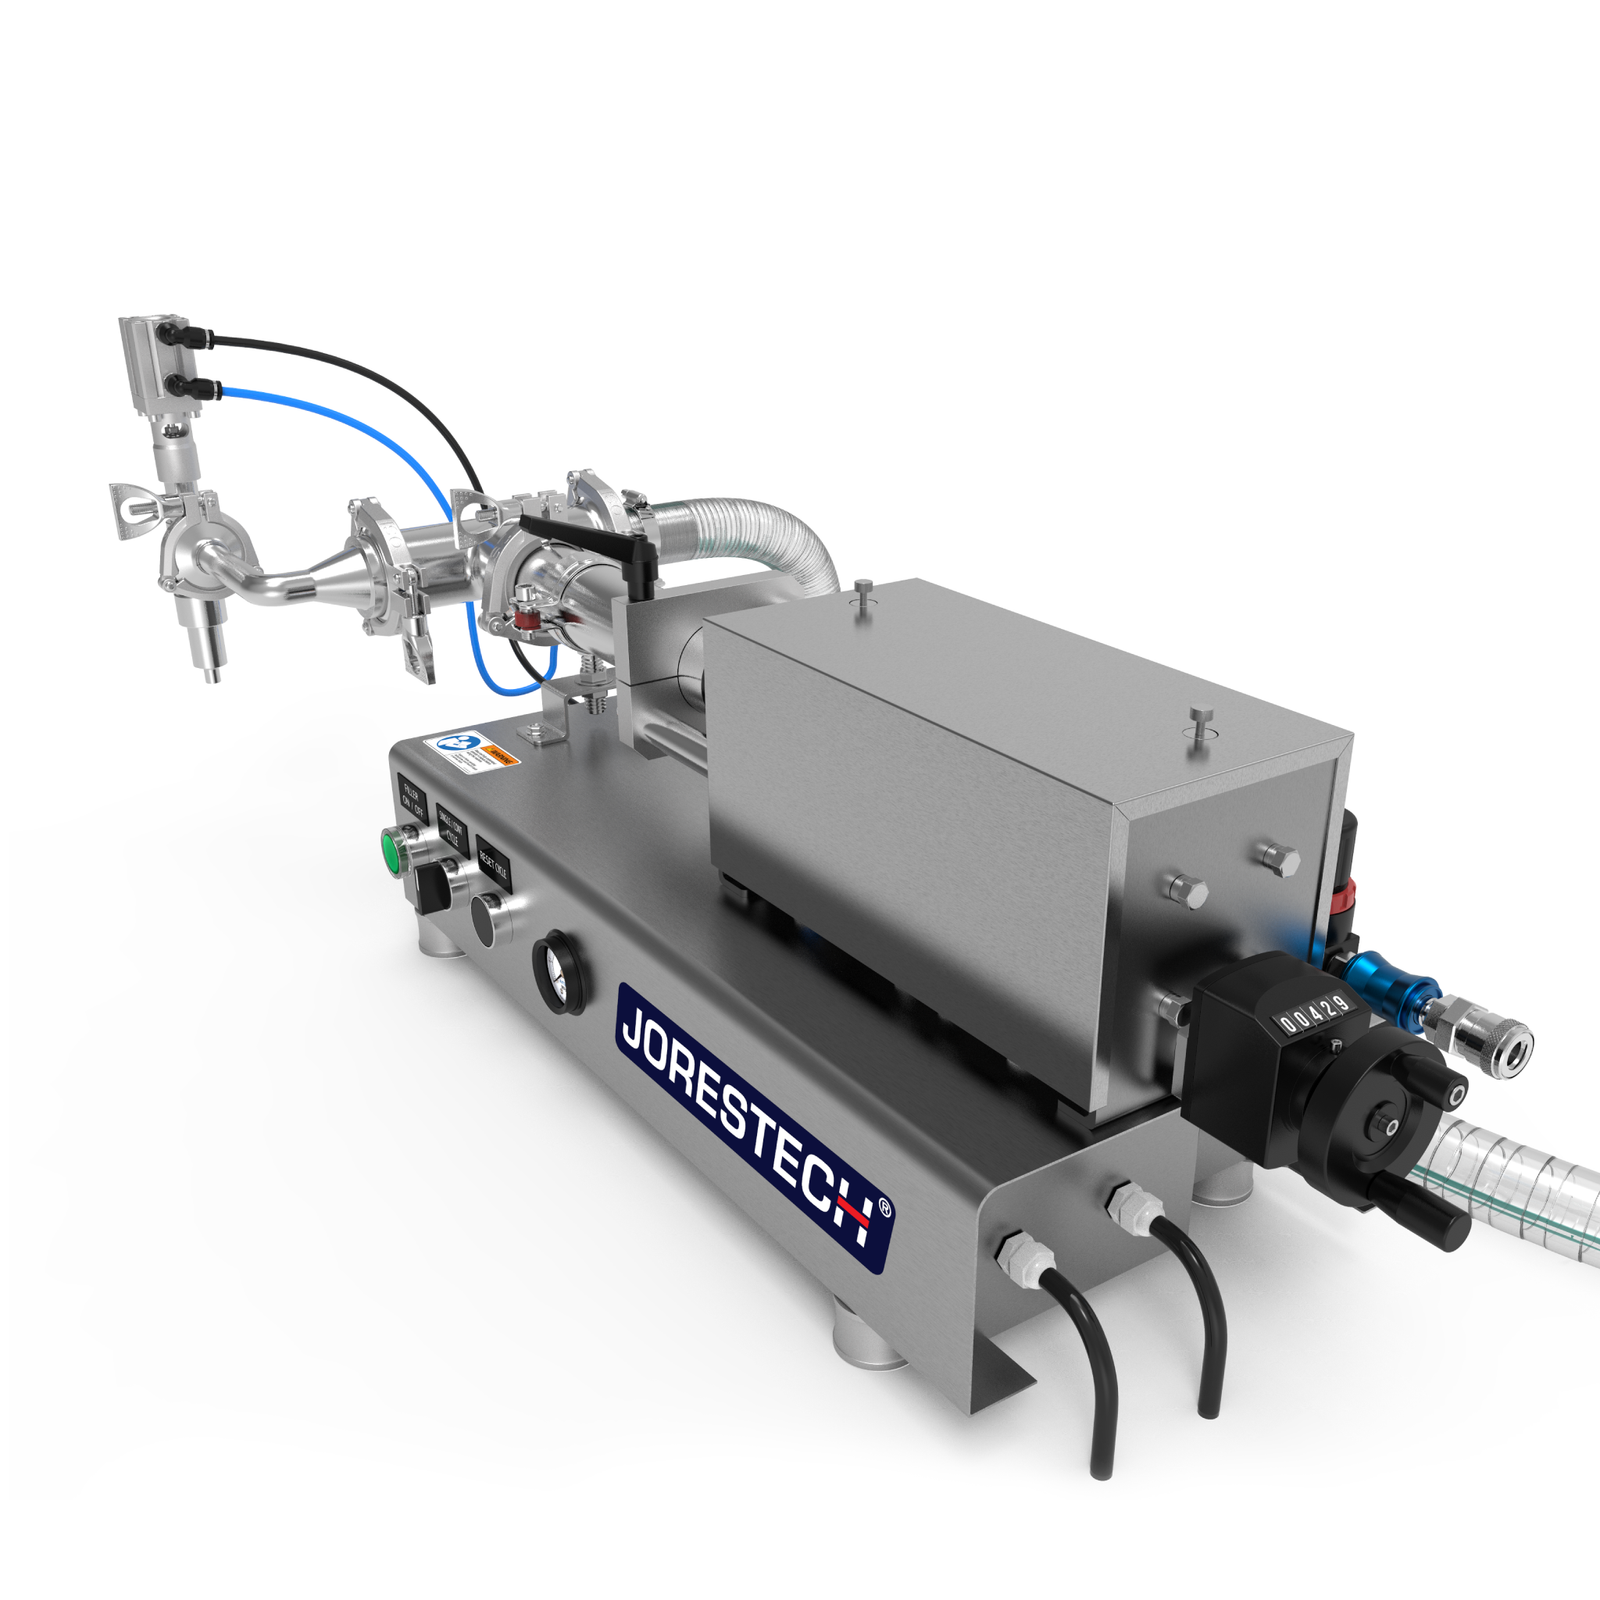 Low viscosity JORES TECHNOLOGIES® liquid filling machine. The fill volume adjuster, main input hose, and compressed air connector can be easily appreciated